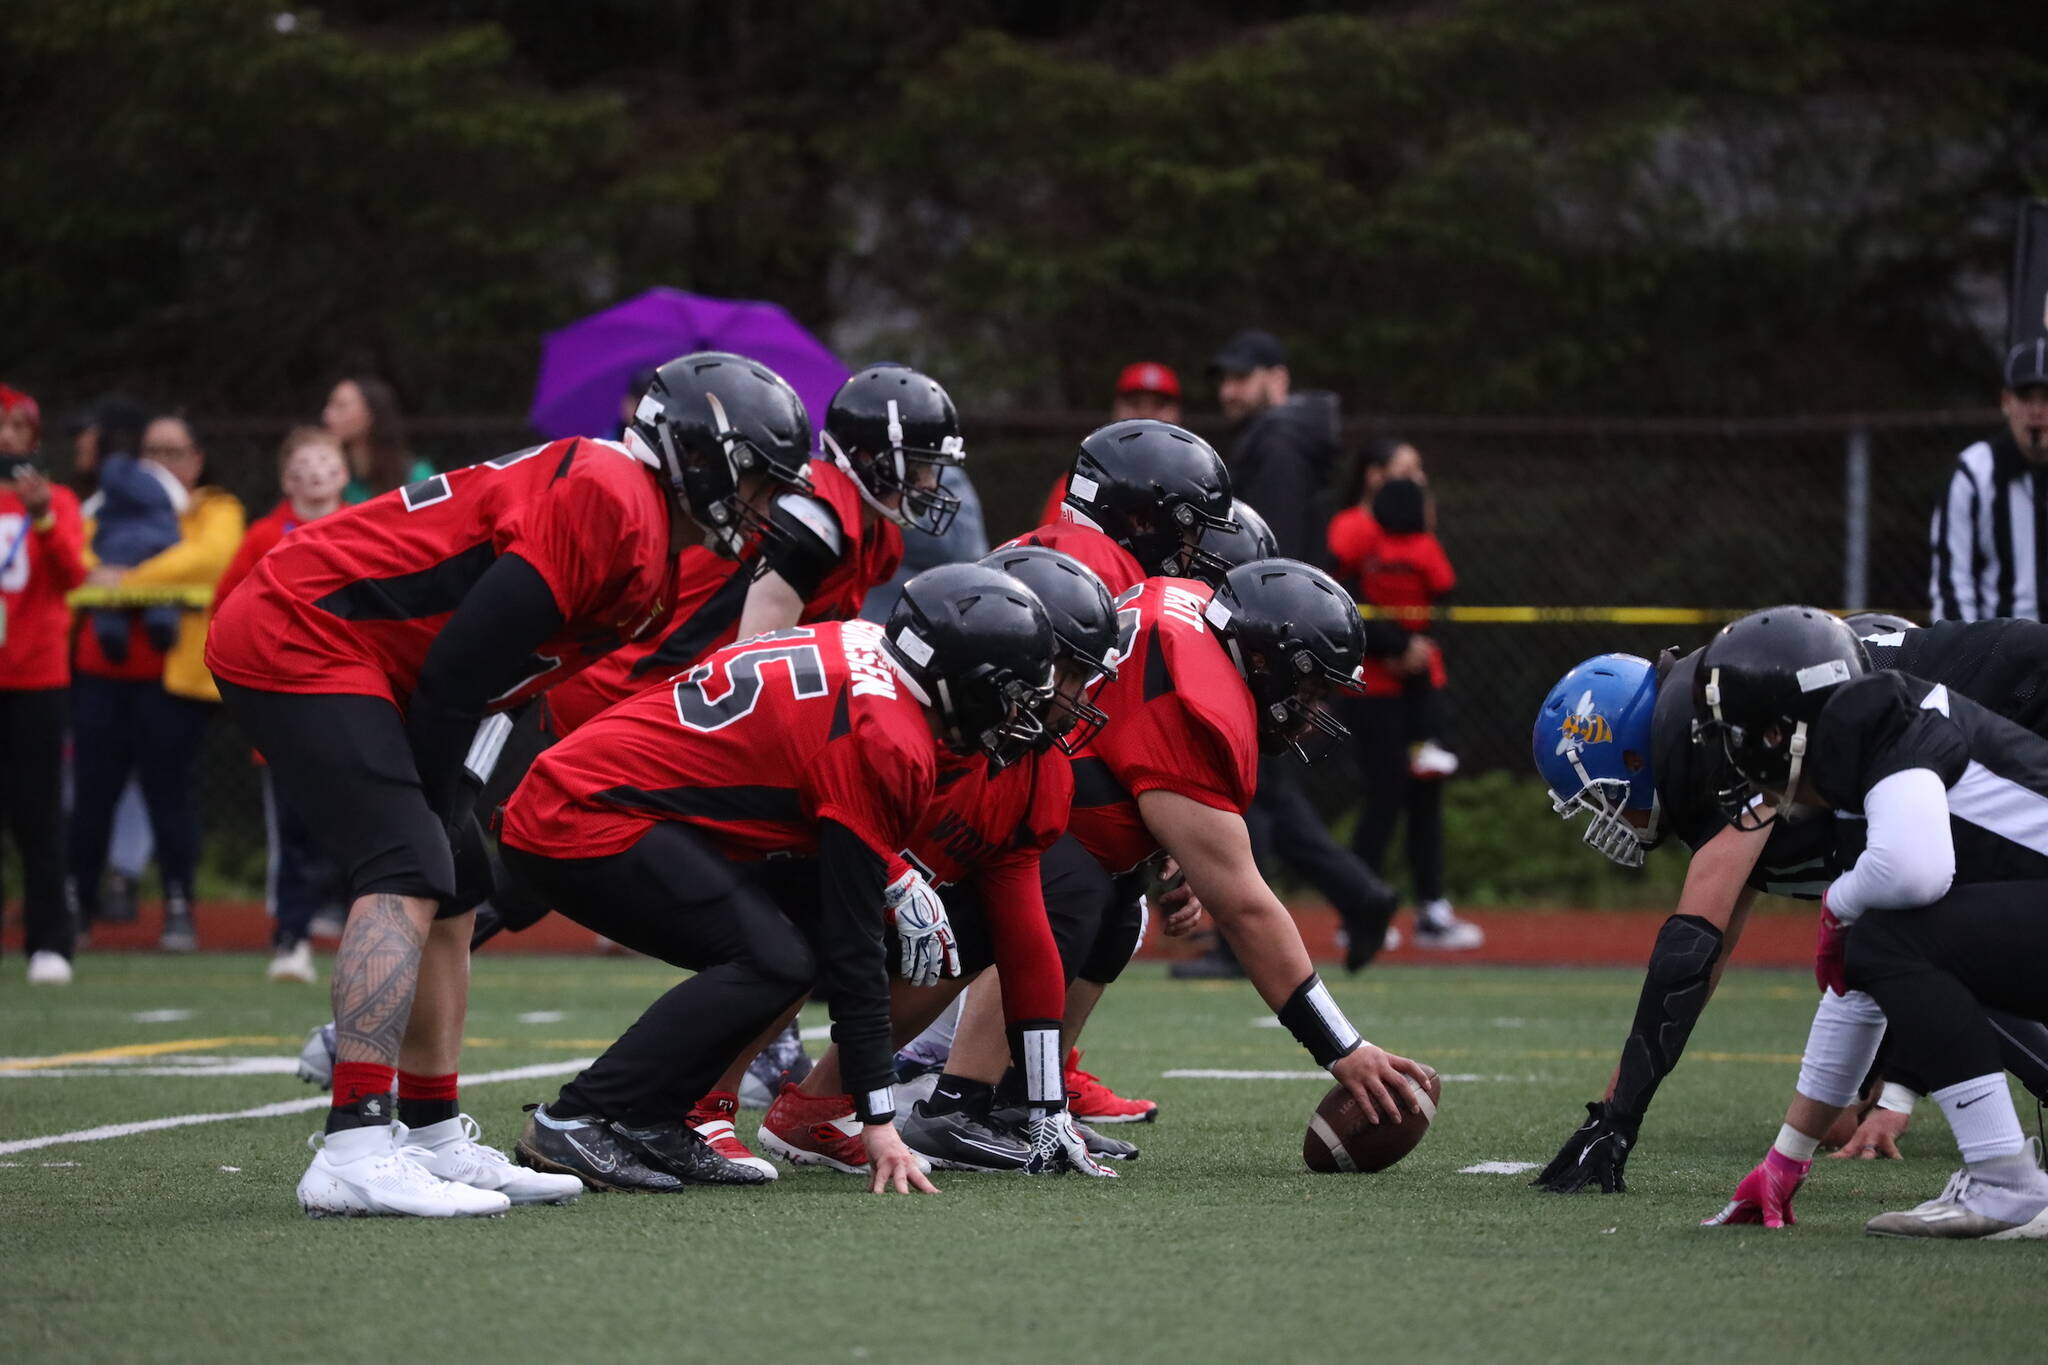 Players line up during the final quarter of Juneau Alumni Football game on Friday at Adair-Kennedy Memorial Park. (Clarise Larson / Juneau Empire)